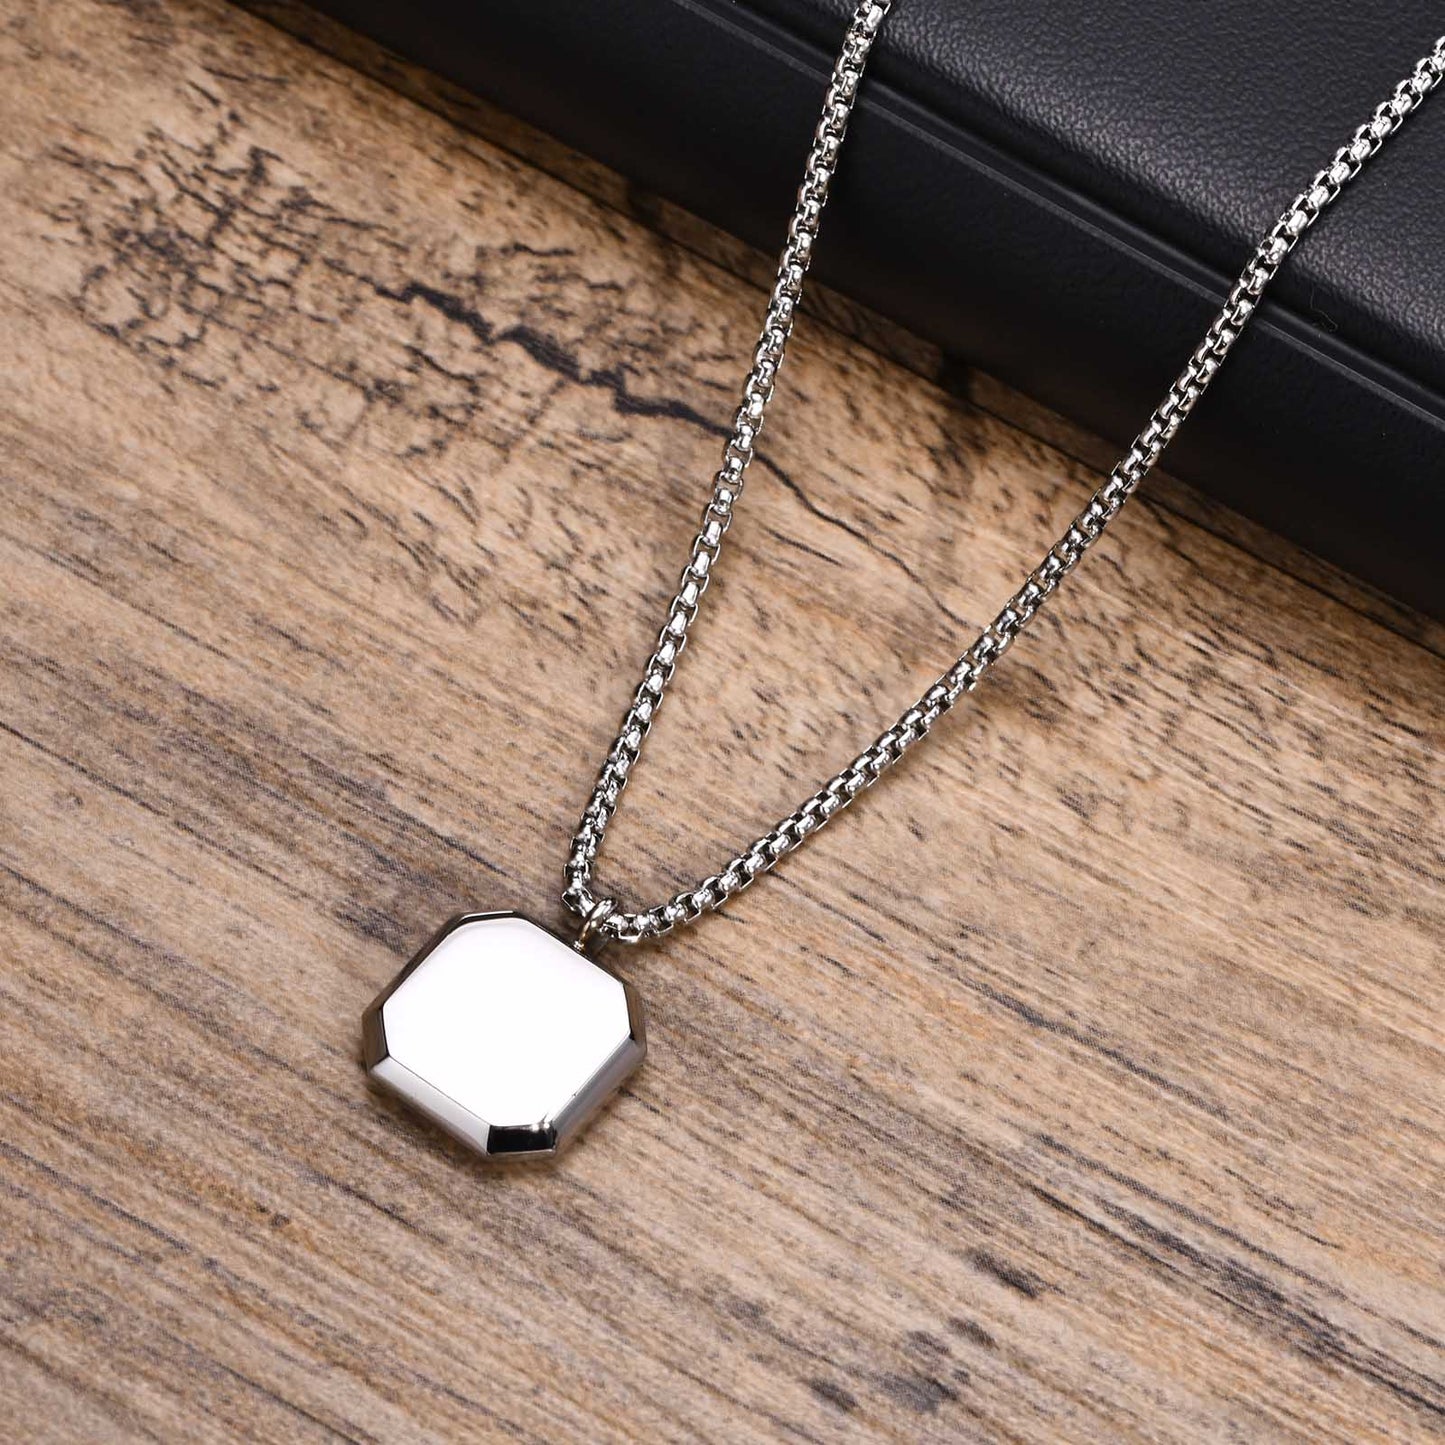 Pendiente y Collar para Hombre o Mujer Square Natural Stone Necklaces for Men, Stylish Punk Stainless Steel Geometric Polygon Pendant Boy Male Gift Jewelry